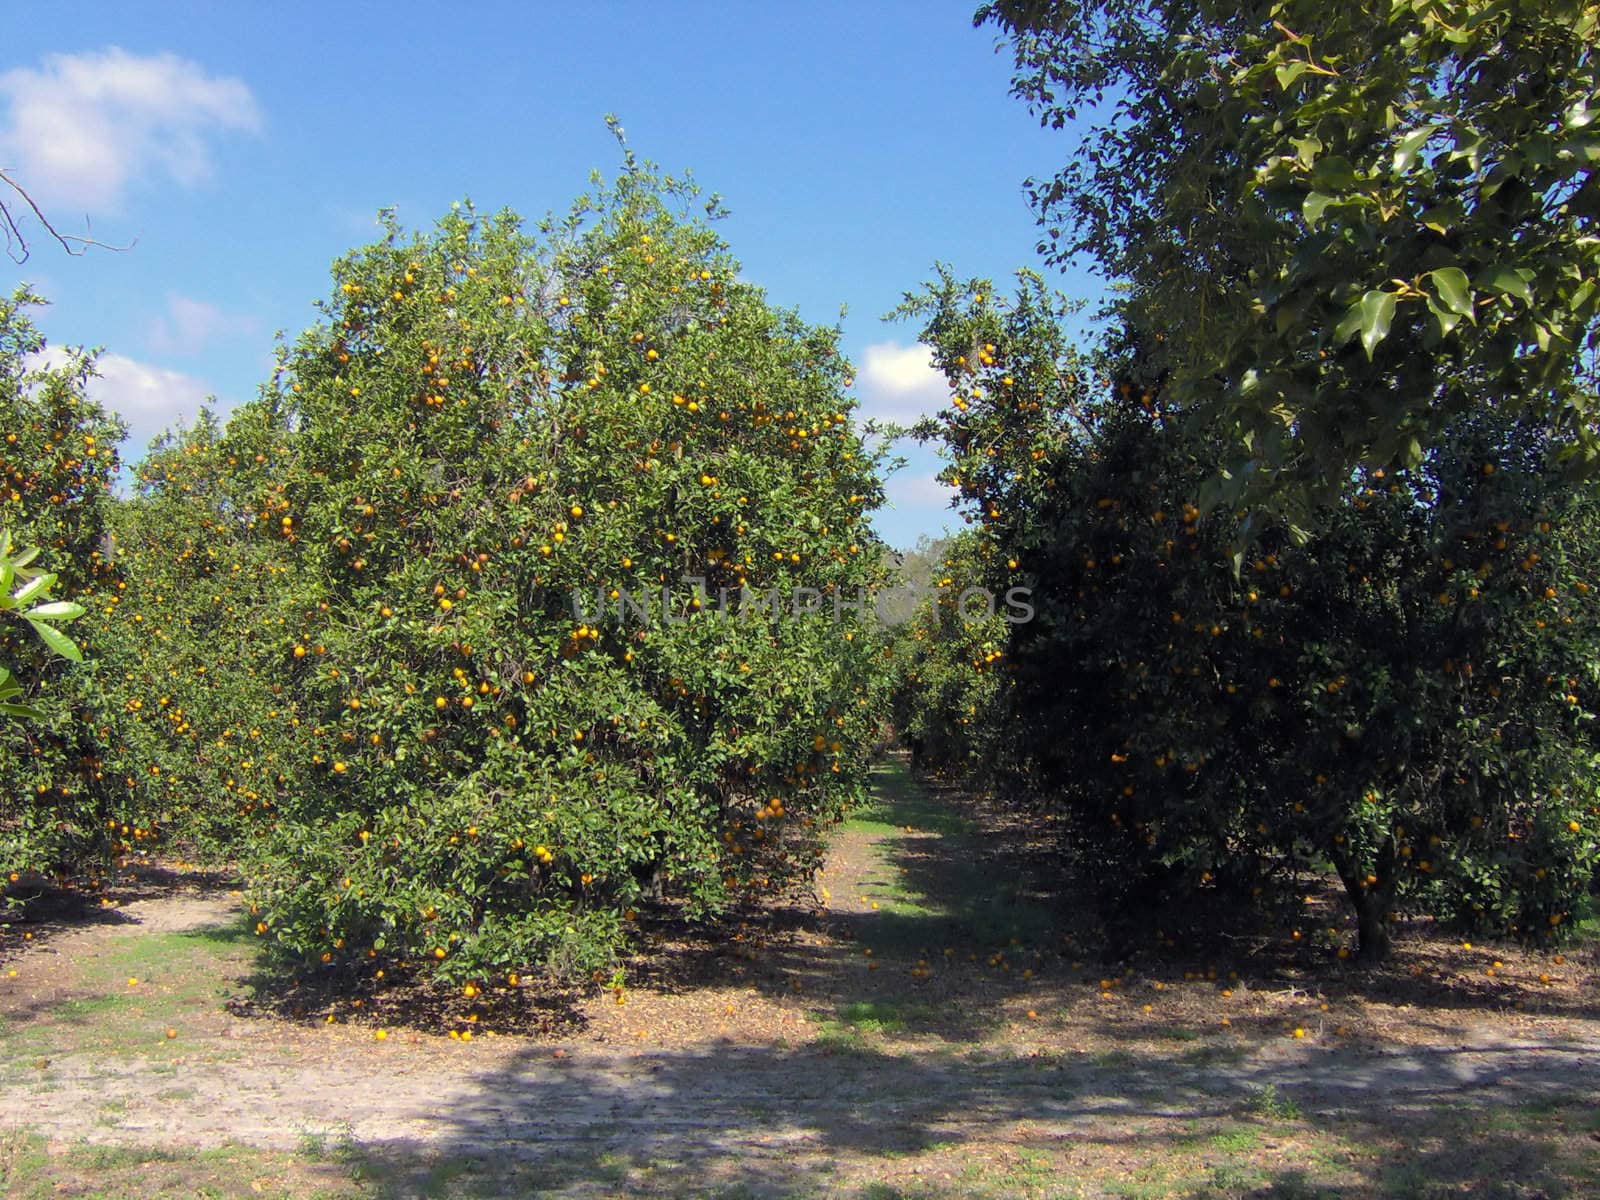 I shot this in Kissimmee / Orlando Florida, behind a flea market parking lot.  There was a huge, beautiful field of oranges.